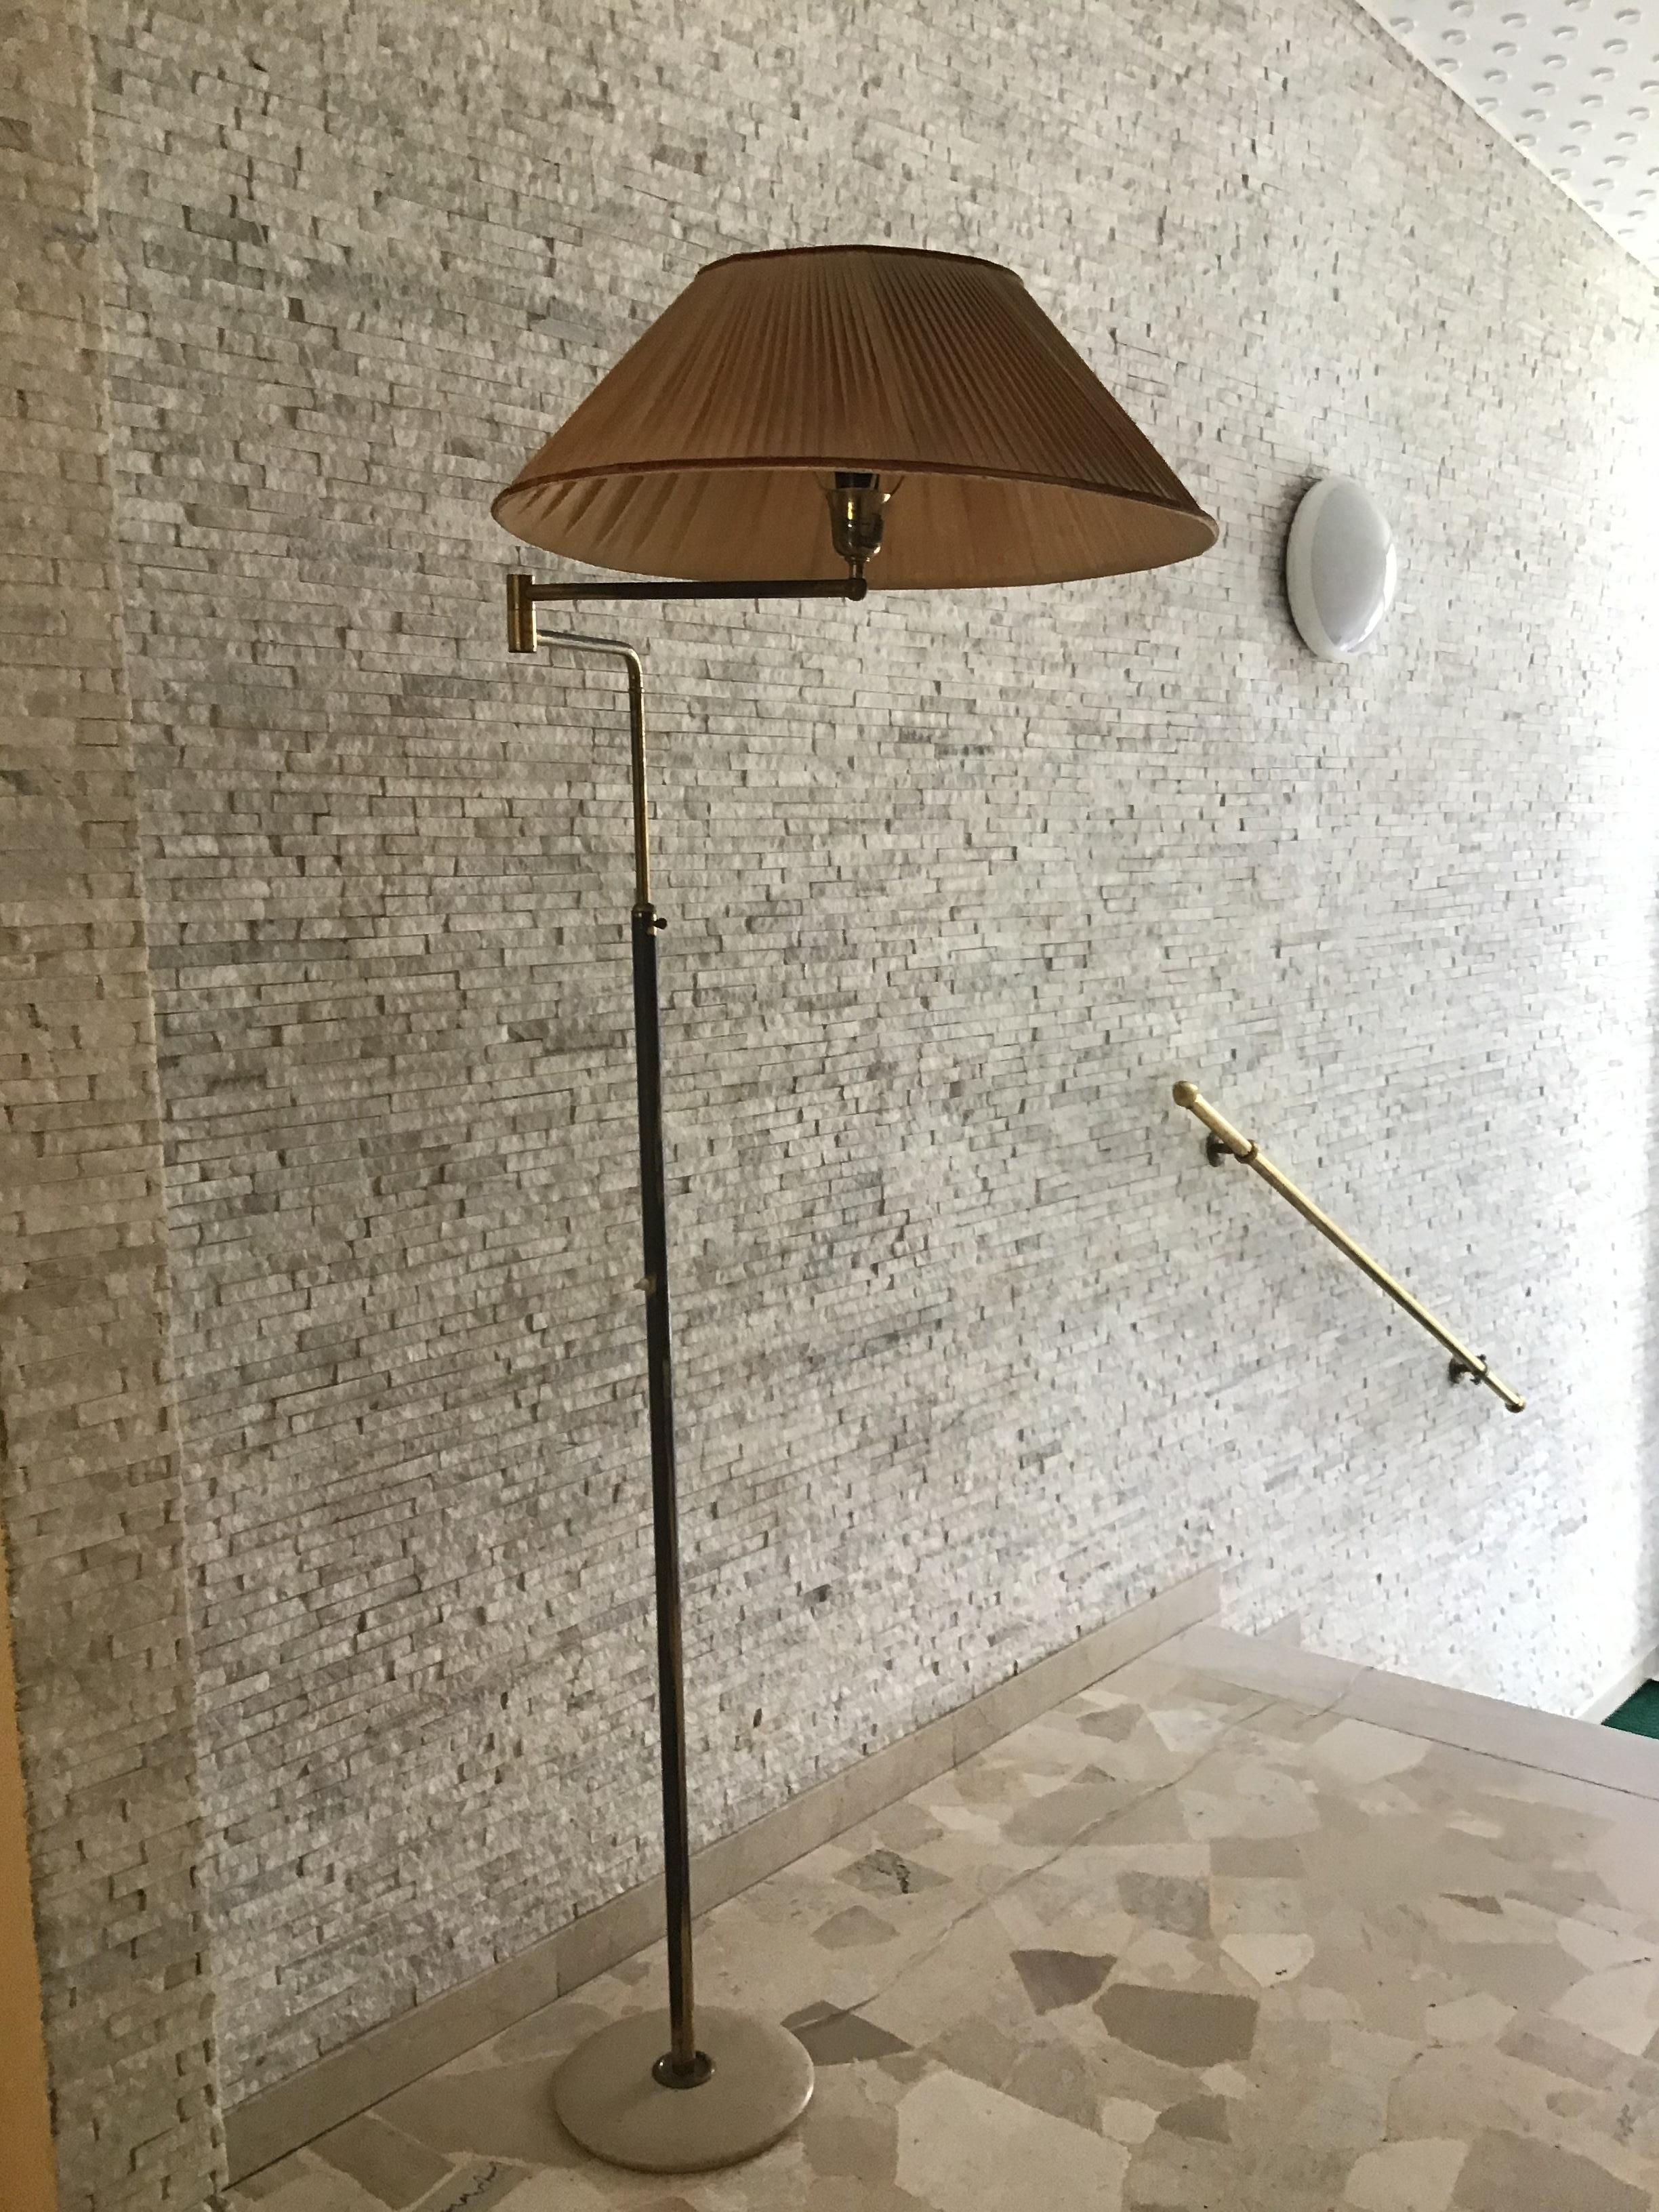 Arredoluce Angelo Lelii Adjustablfloor Lamp Marbre Brass Lampshade 1950, Italy In Excellent Condition For Sale In Milano, IT